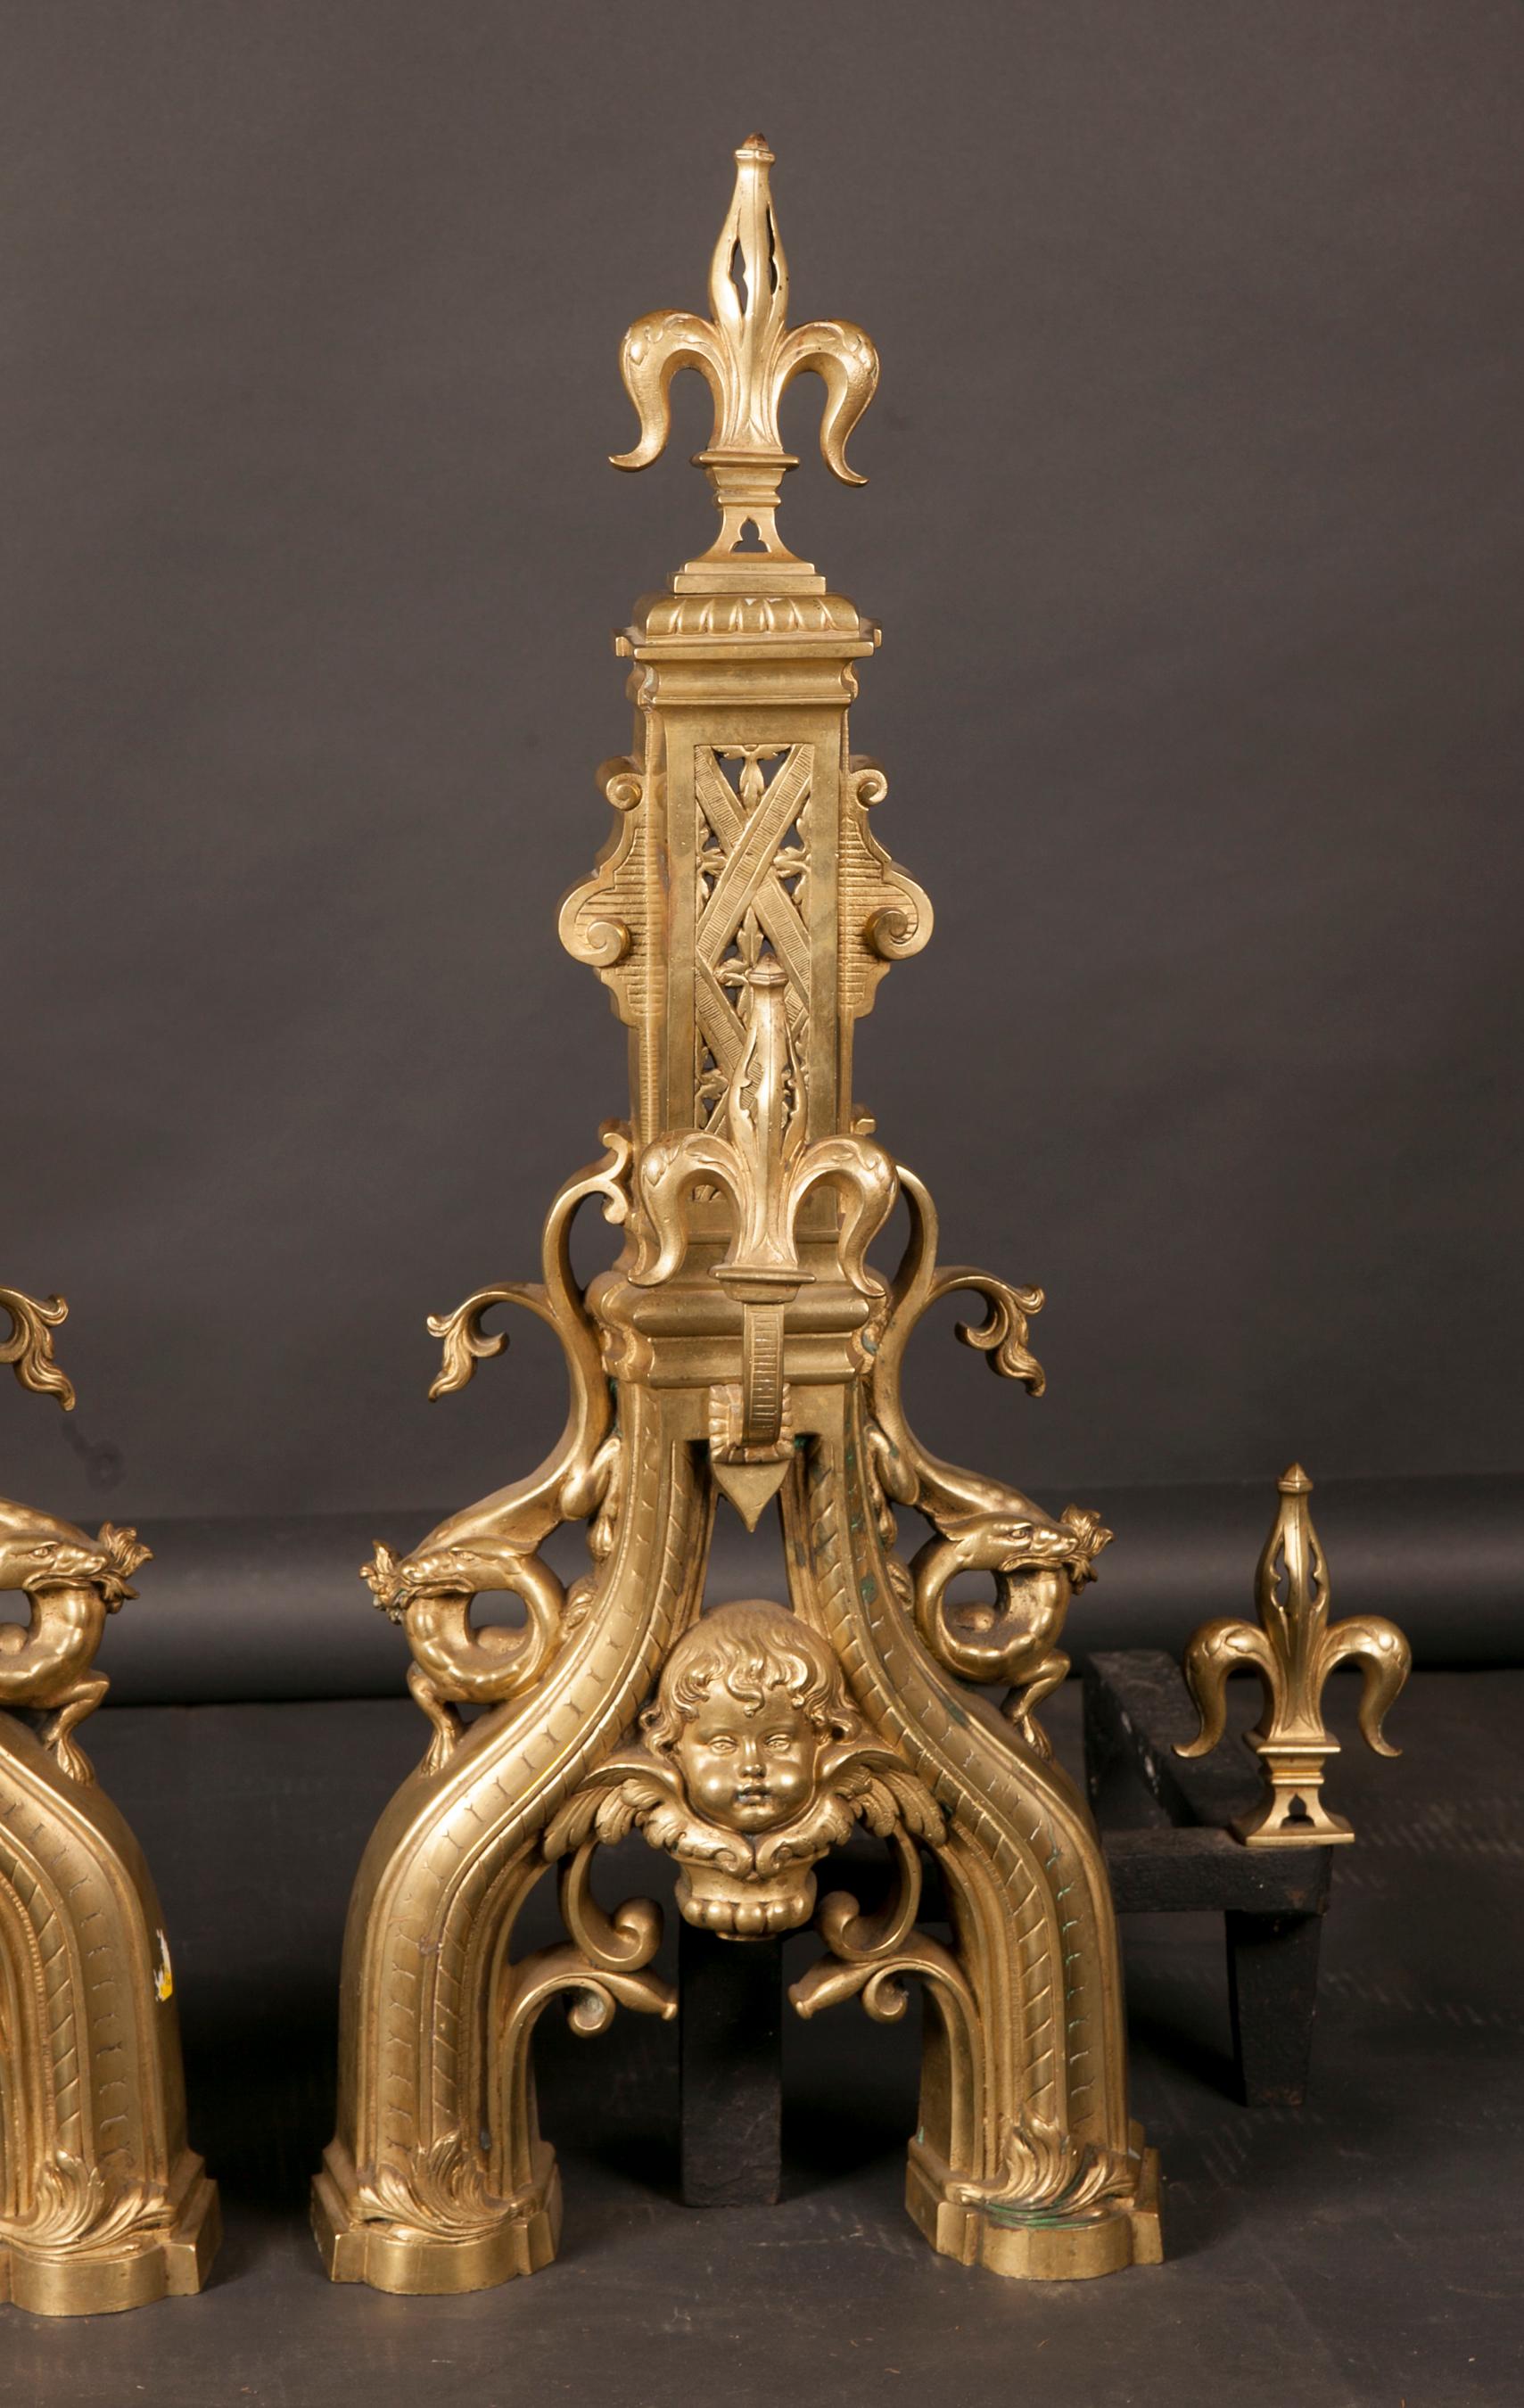 This fantastic pair of monumental French Louis XVI chenets are made of bronze and date back to the 18th century. The pair is adorned with Fleur de Lis at top, canter, and ends, and a single putti face is found at the centre of each. The bronze is